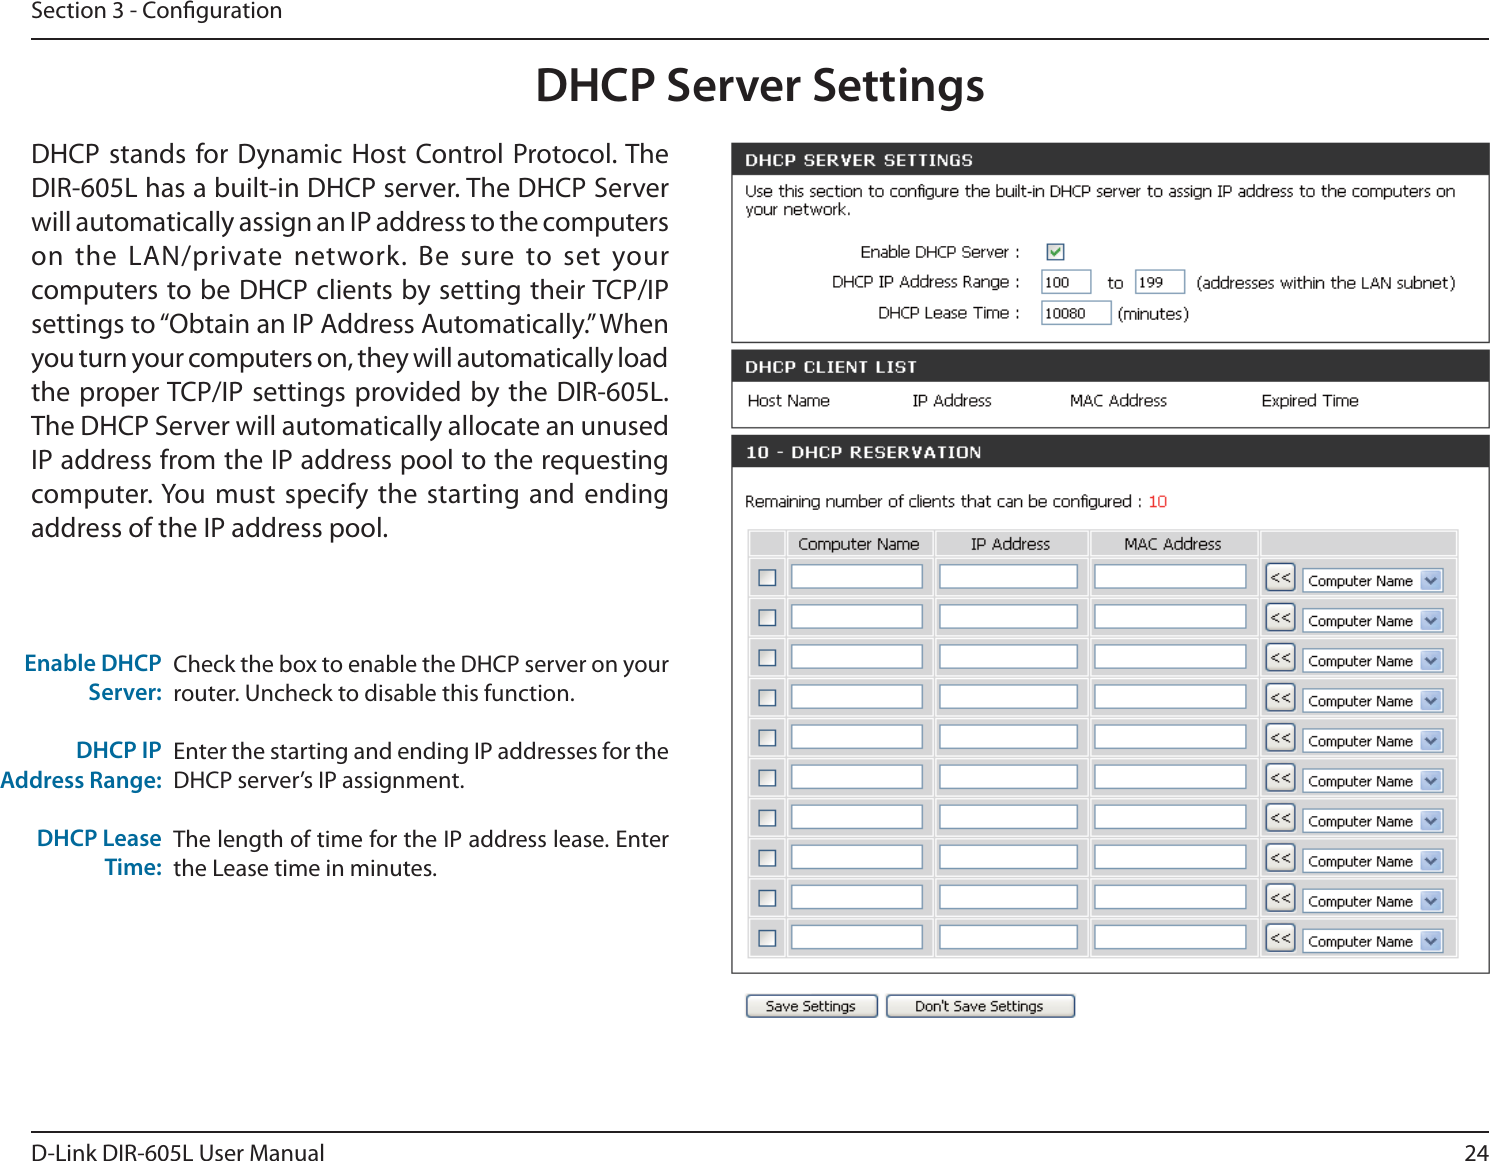 24D-Link DIR-605L User ManualSection 3 - CongurationCheck the box to enable the DHCP server on your router. Uncheck to disable this function.Enter the starting and ending IP addresses for the DHCP server’s IP assignment.The length of time for the IP address lease. Enter the Lease time in minutes.Enable DHCP Server:DHCP IPAddress Range:DHCP Lease Time:DHCP Server SettingsDHCP stands for Dynamic Host Control Protocol. The DIR-605L has a built-in DHCP server. The DHCP Server will automatically assign an IP address to the computers on the LAN/private network. Be sure to set your computers to be DHCP clients by setting their TCP/IP settings to “Obtain an IP Address Automatically.” When you turn your computers on, they will automatically load the proper TCP/IP settings provided by the DIR-605L. The DHCP Server will automatically allocate an unused IP address from the IP address pool to the requesting computer. You must specify the starting and ending address of the IP address pool.